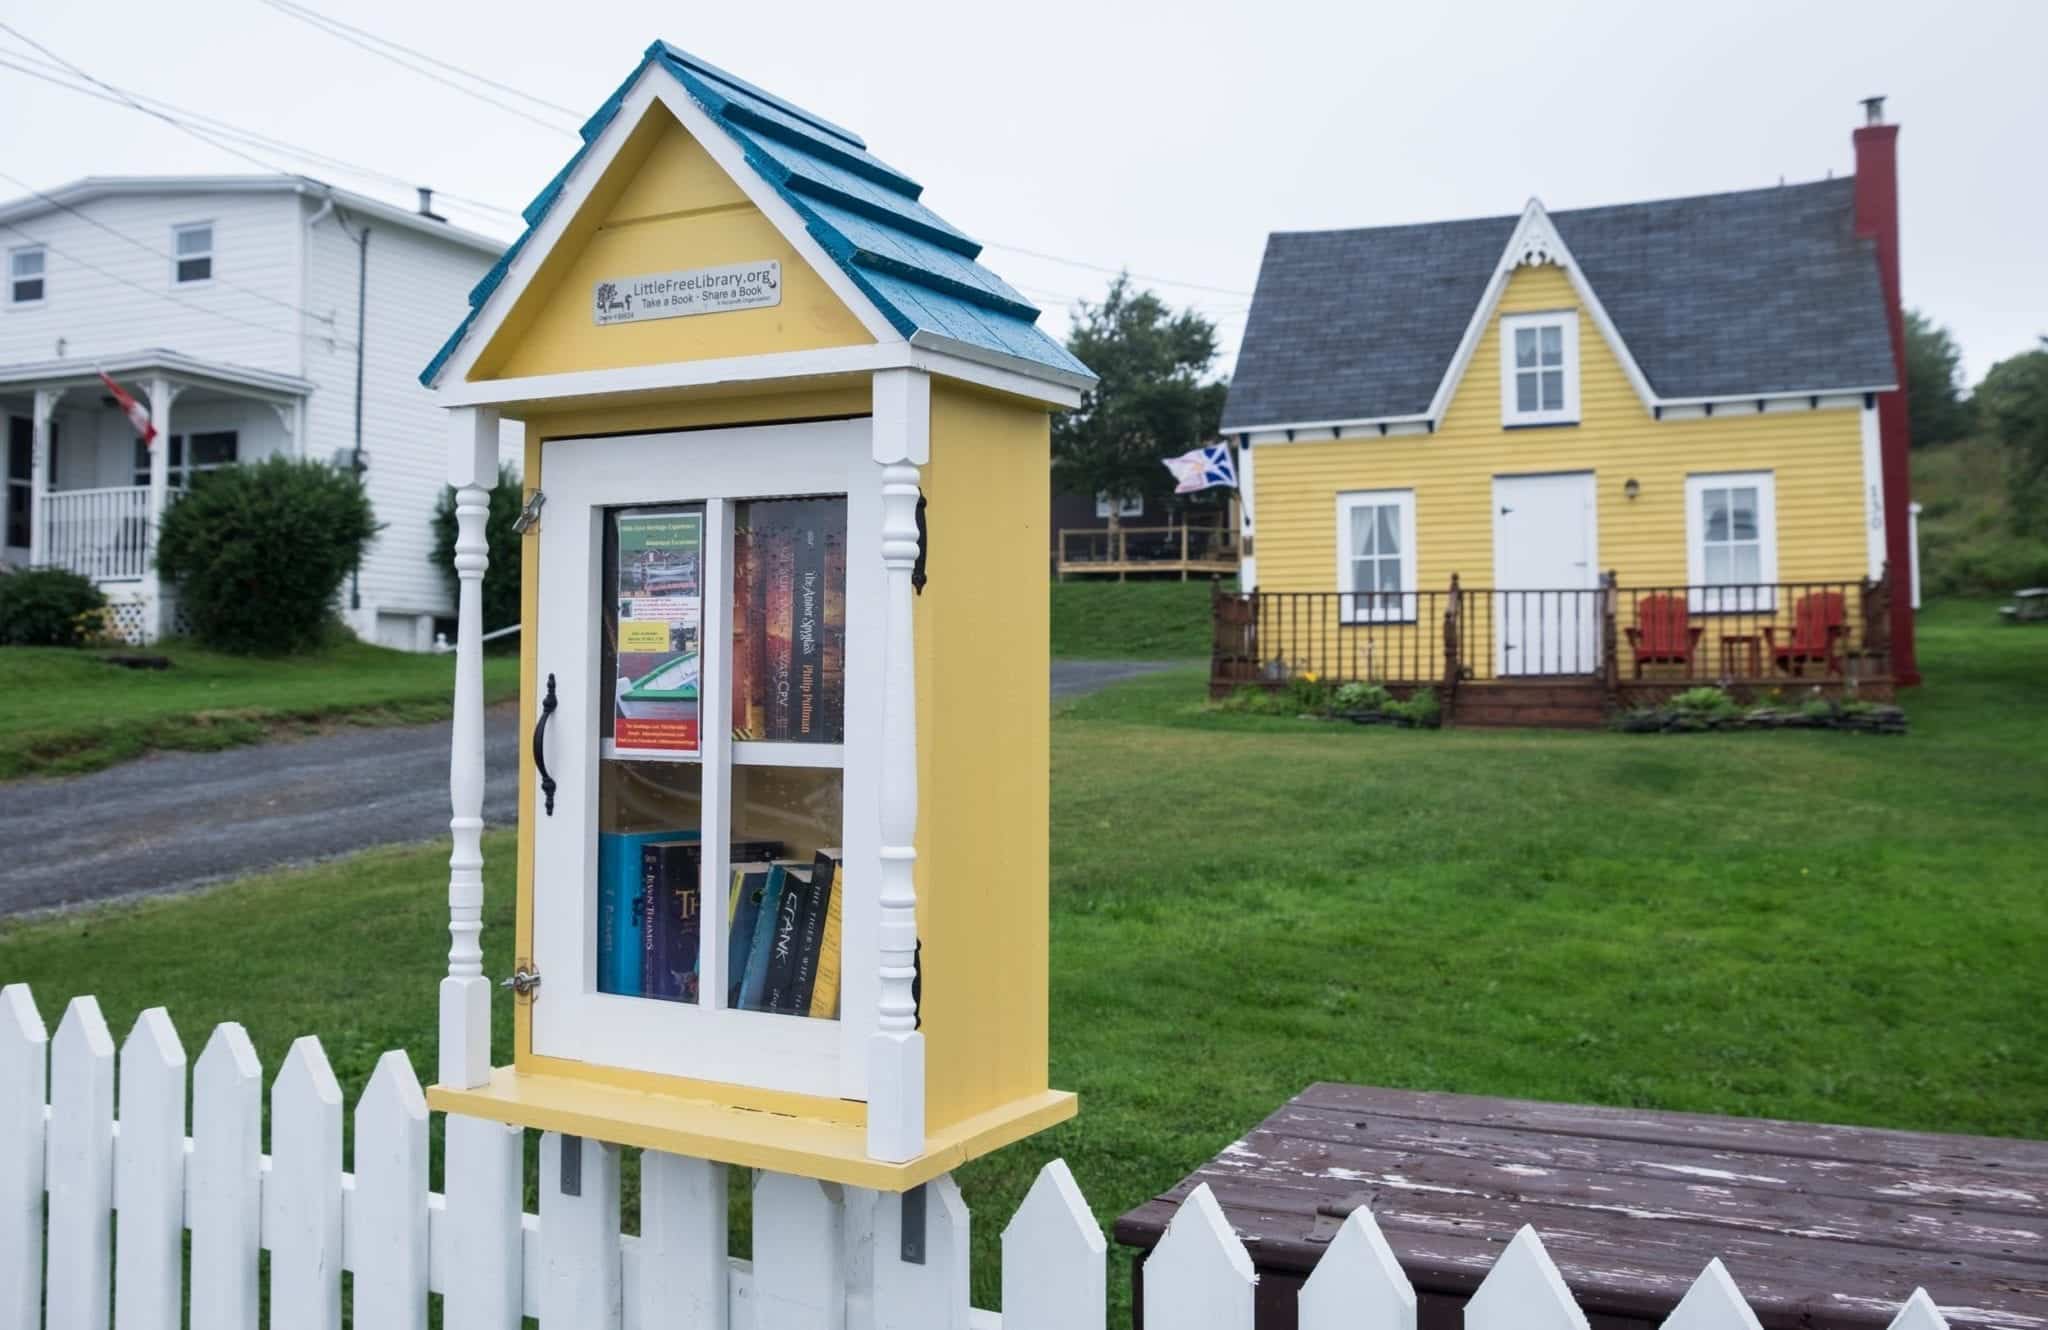 A yellow little library built on a white picket fence with books behind the glass door. In the background, a matching yellow cottage.